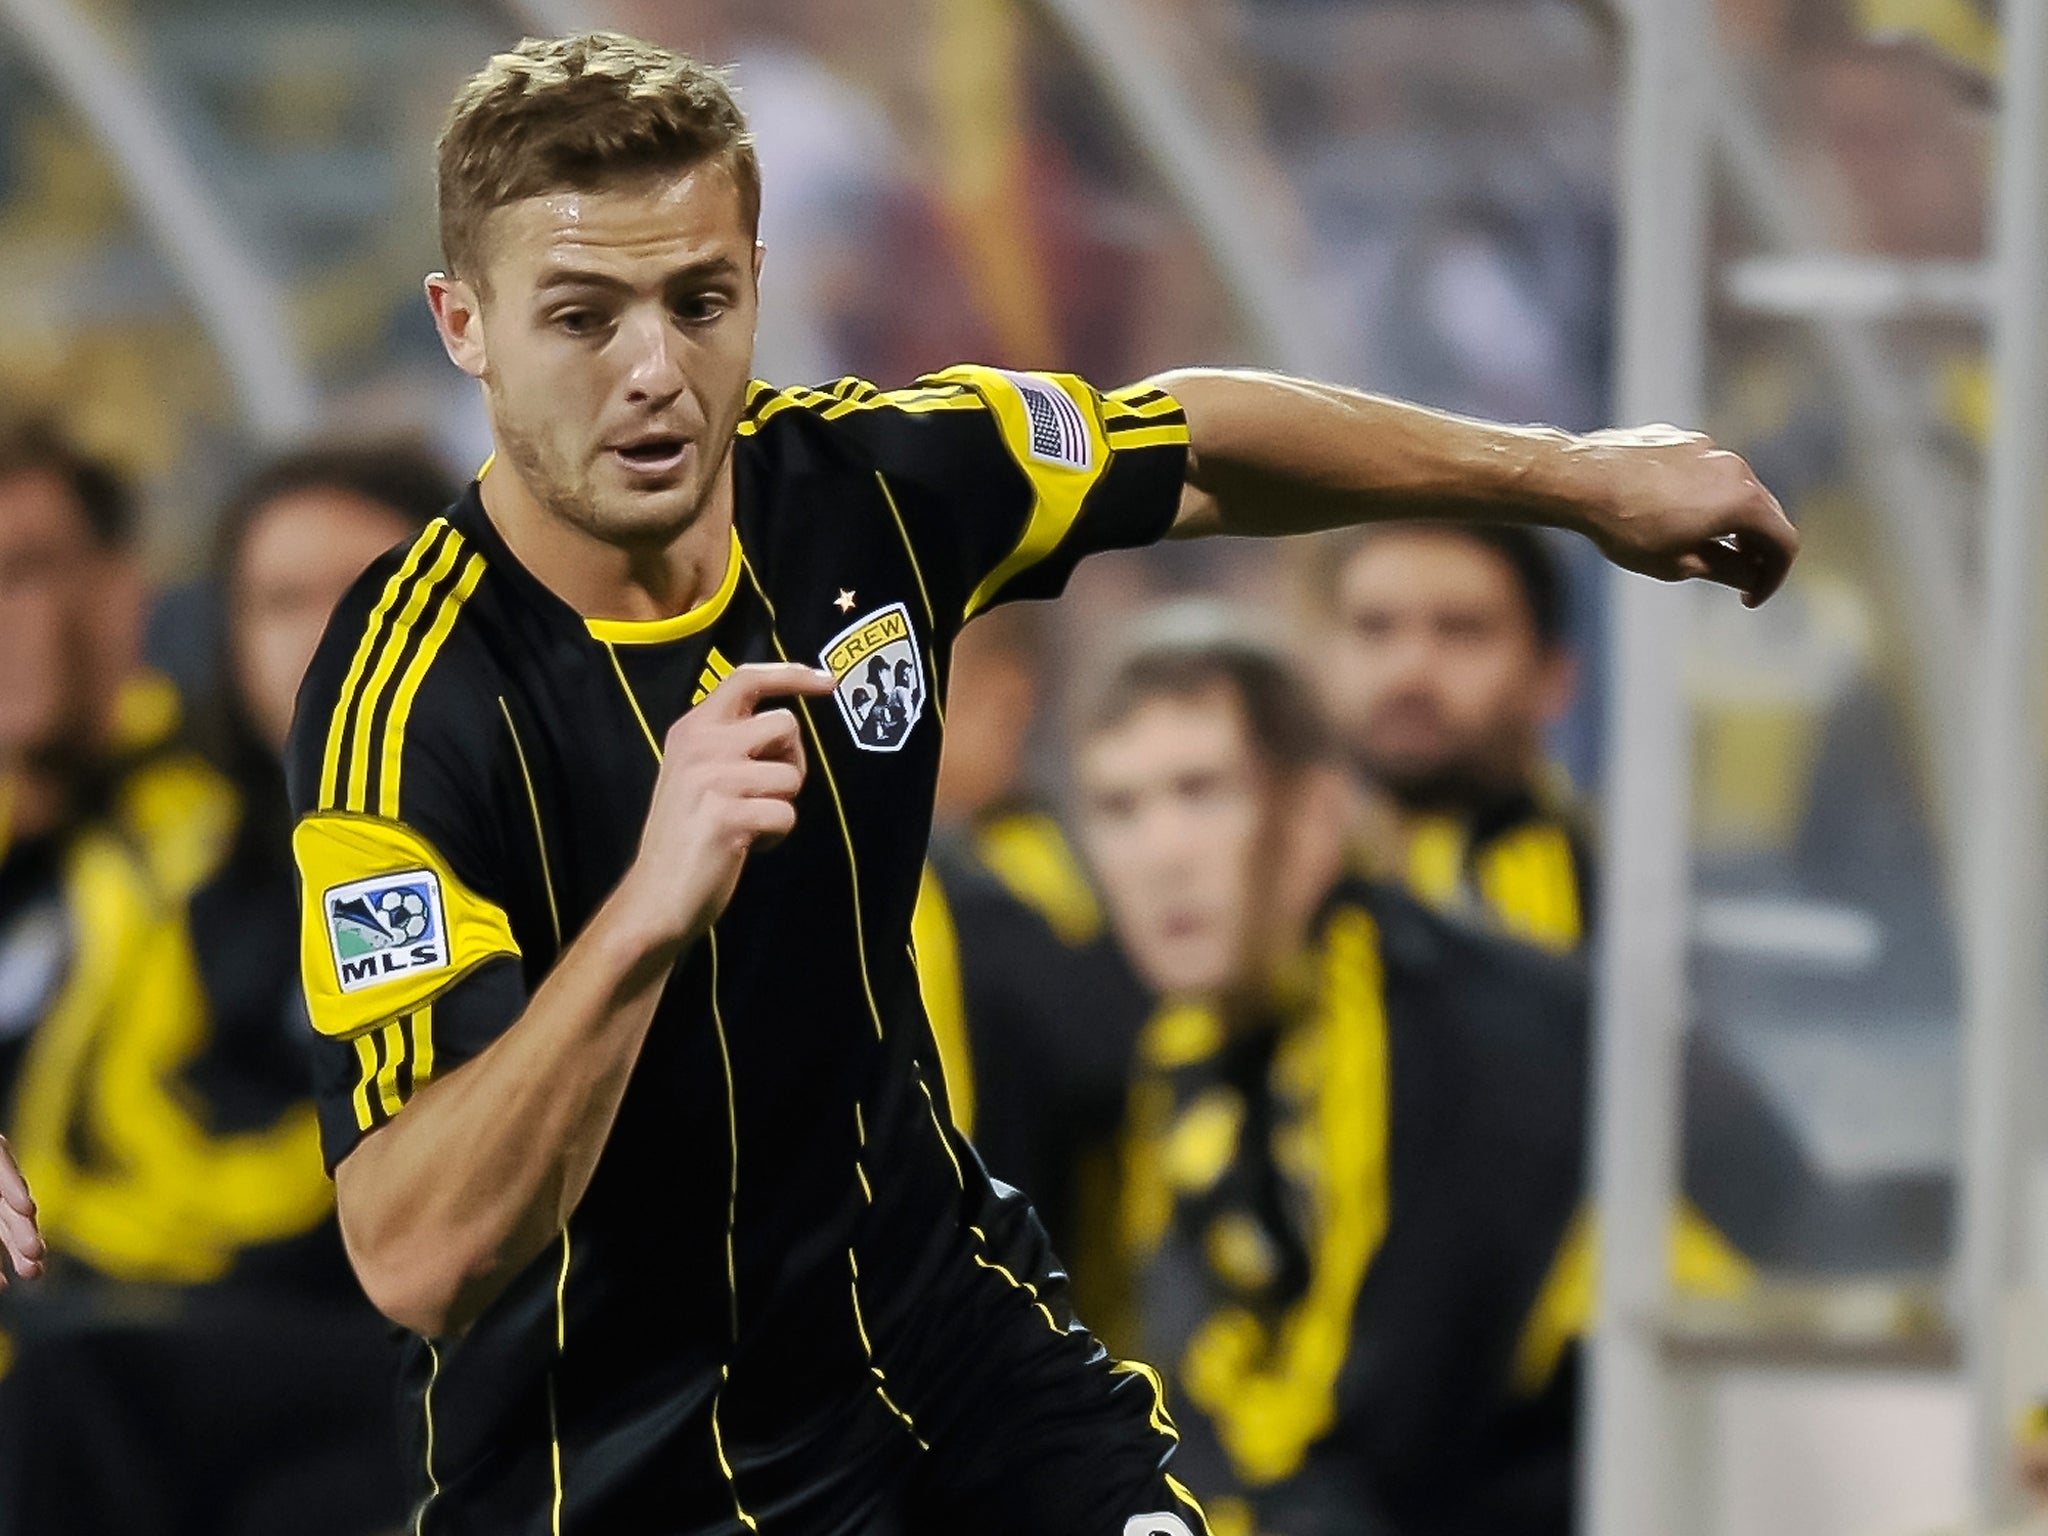 Robbie Rogers: the former Leeds midfielder came out as gay last month and has since retired